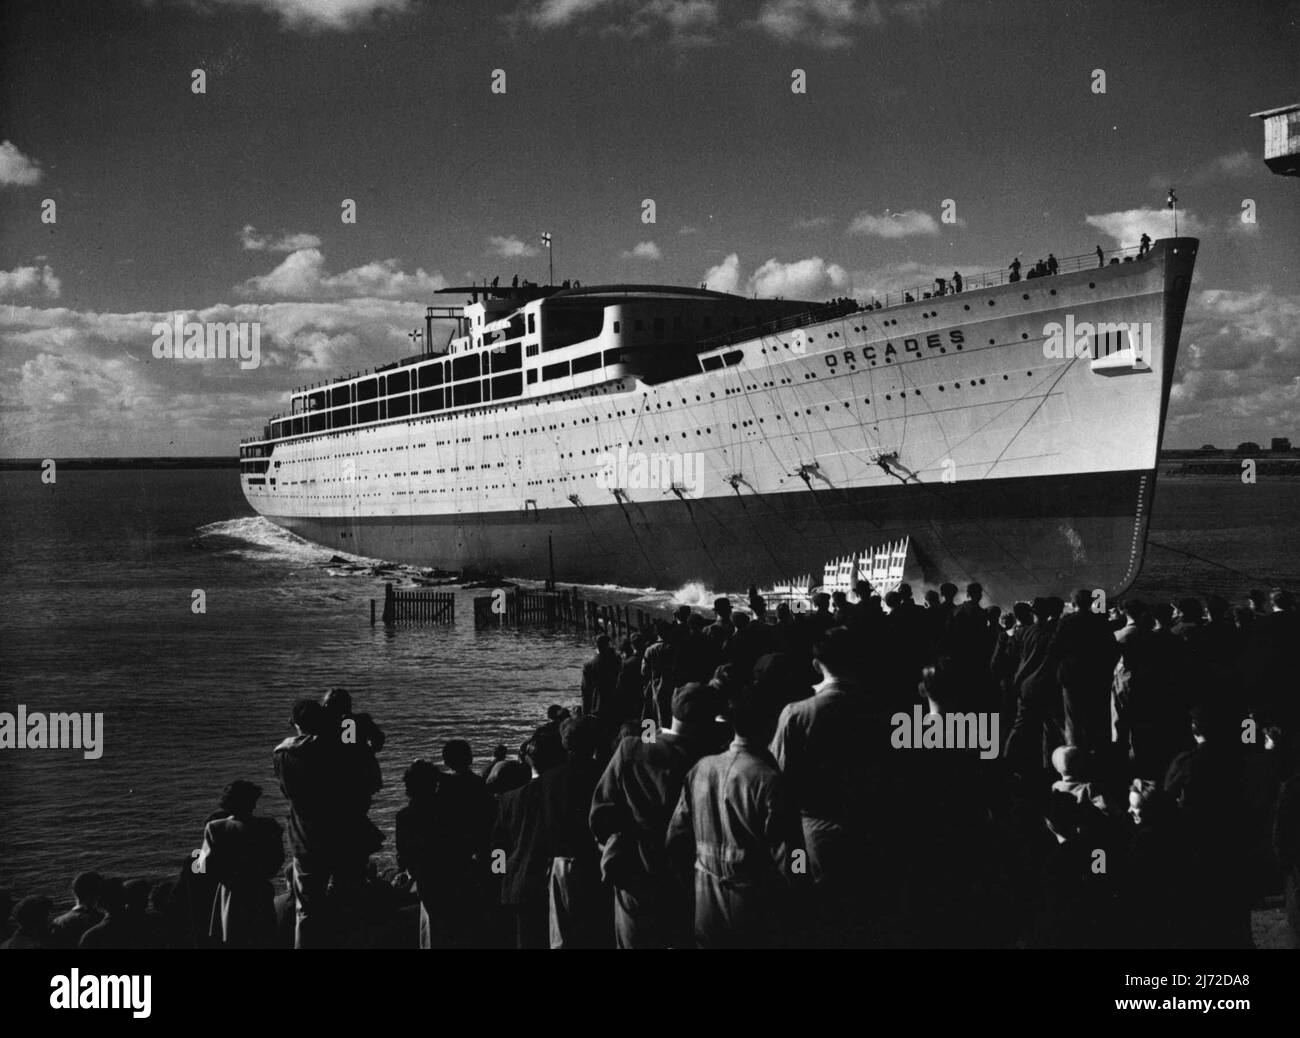 Largest Post-War Liner Launched -- The 31,000-ton liner 'Orcades', built by Vickers-Armstrong for the Orient Line at their Barrow-in-Furness Yards, was launched yesterday by Lady Morshead, wife of the Sydney Manager of the Line. The 'Orcades' is the biggest merchant ship in the world to be launched since the war, and has been built for the Australian trade at a cost of £3,000,000. It will carry over 1,500 passengers and 608 crew. The picture shows tugs fussing round the ship to take her out to the fitting out yards after the launch. October 15, 1947. Stock Photo